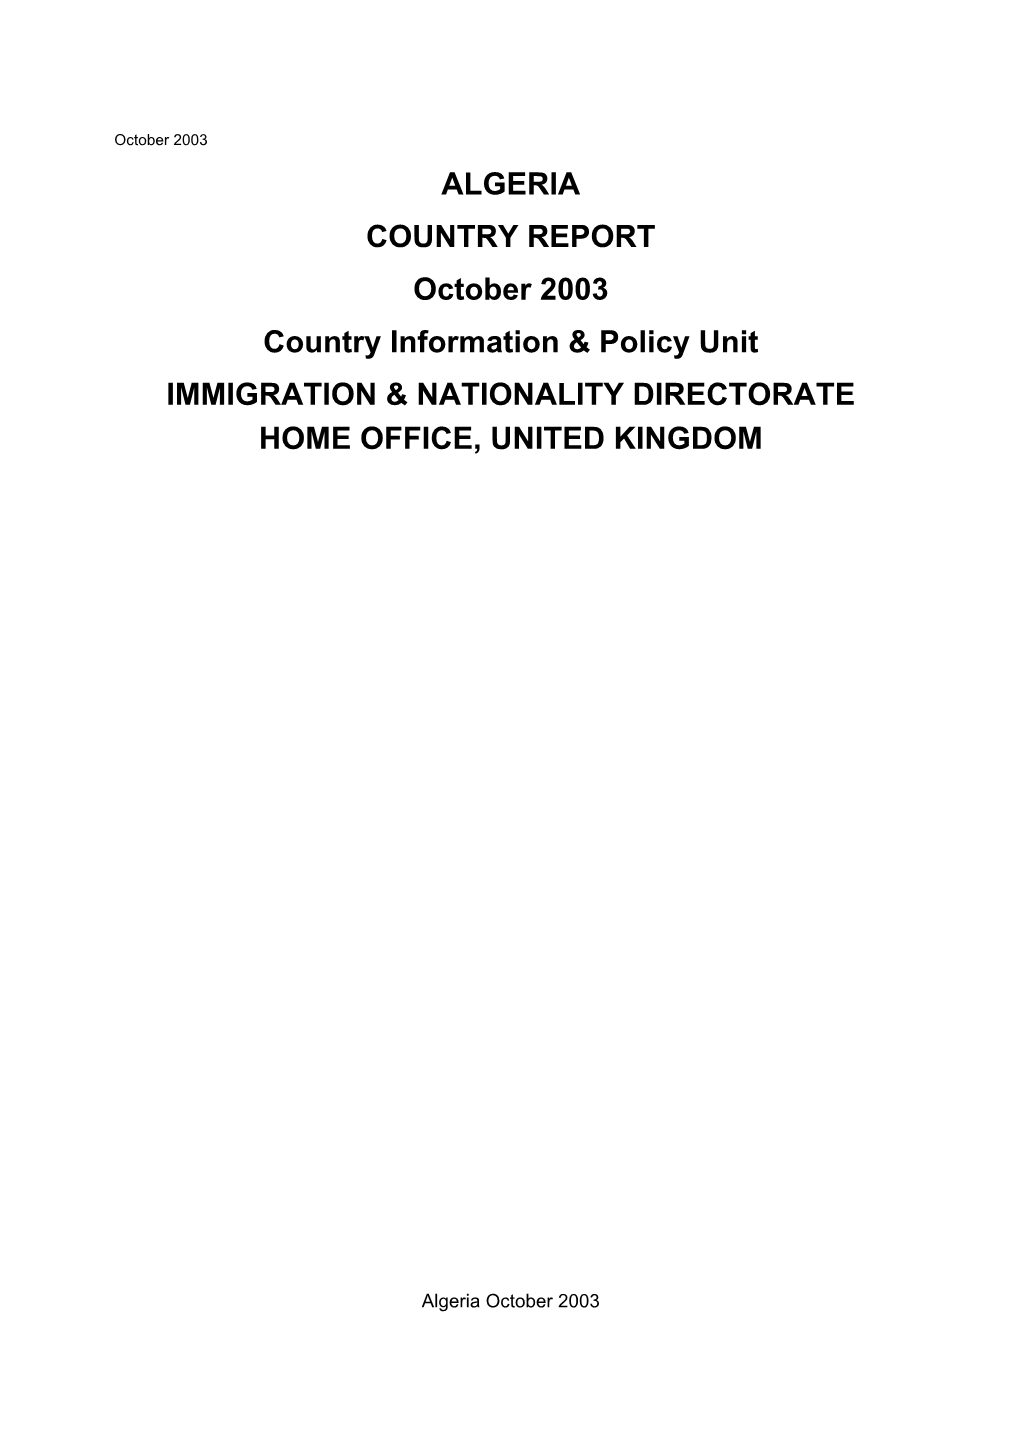 ALGERIA COUNTRY REPORT October 2003 Country Information & Policy Unit IMMIGRATION & NATIONALITY DIRECTORATE HOME OFFICE, UNITED KINGDOM